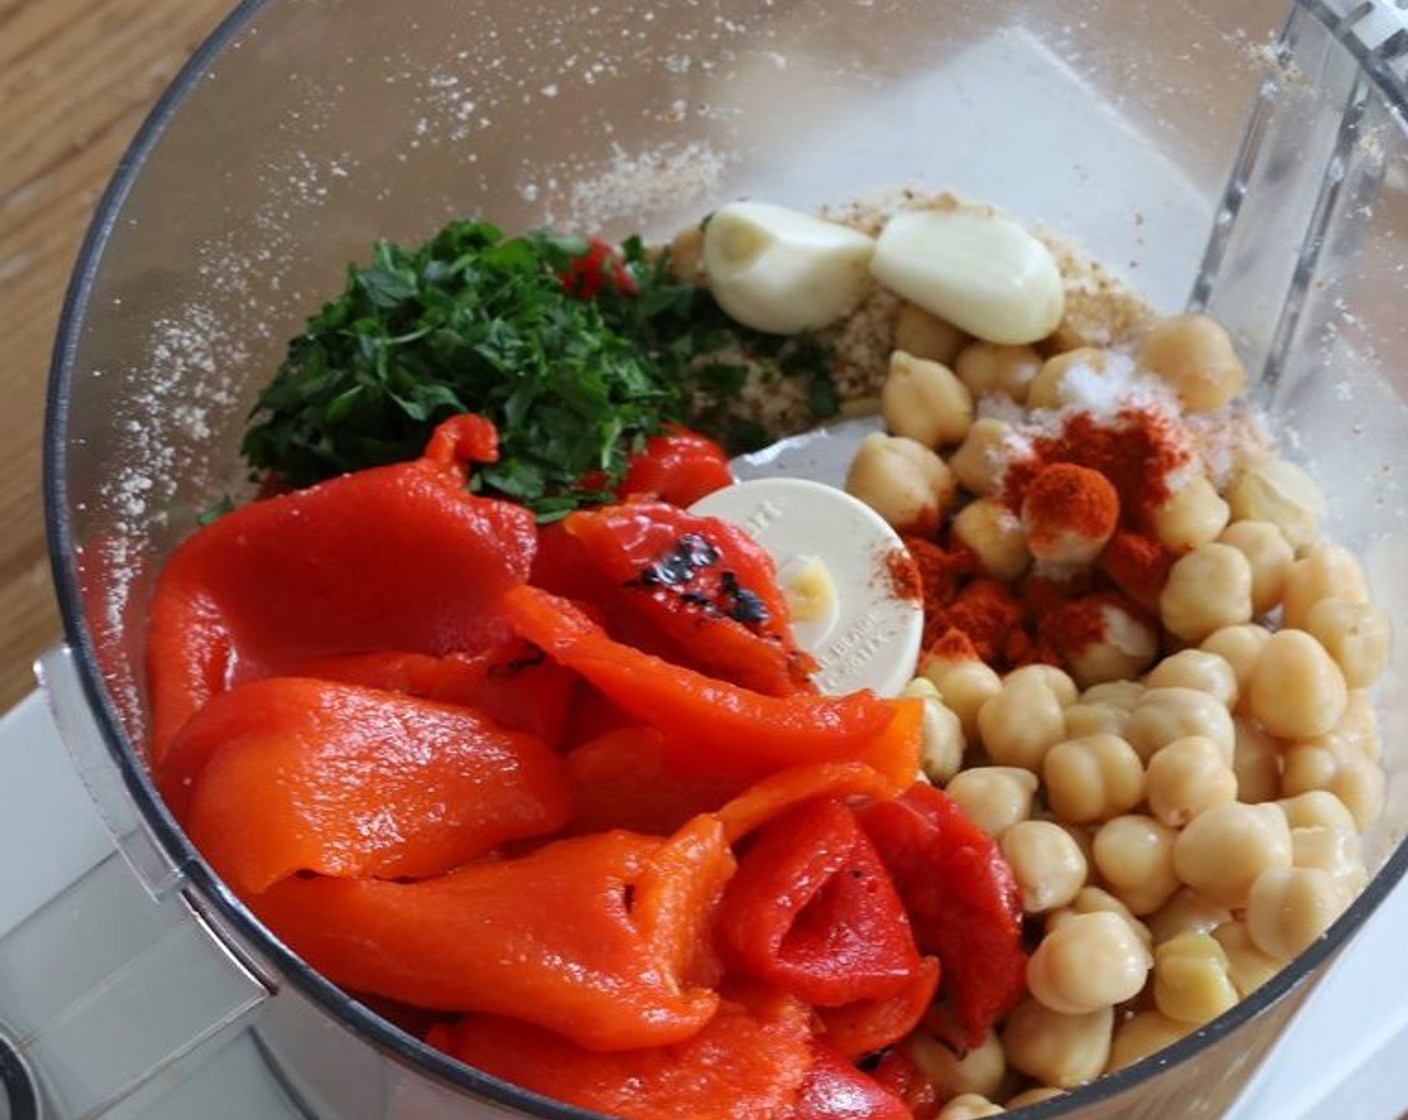 step 4 Add Roasted Red Peppers (1 jar) to the food processor or blender, reserving the liquid left behind in the jar, along with the Chickpeas (1 can), Garlic (2 cloves), Fresh Parsley (2 Tbsp), Sherry Vinegar (2 Tbsp), Smoked Paprika (1/4 tsp), Kosher Salt (1 tsp), and 3 Tbsp of liquid from the jar of peppers. Use less if you've already added some.